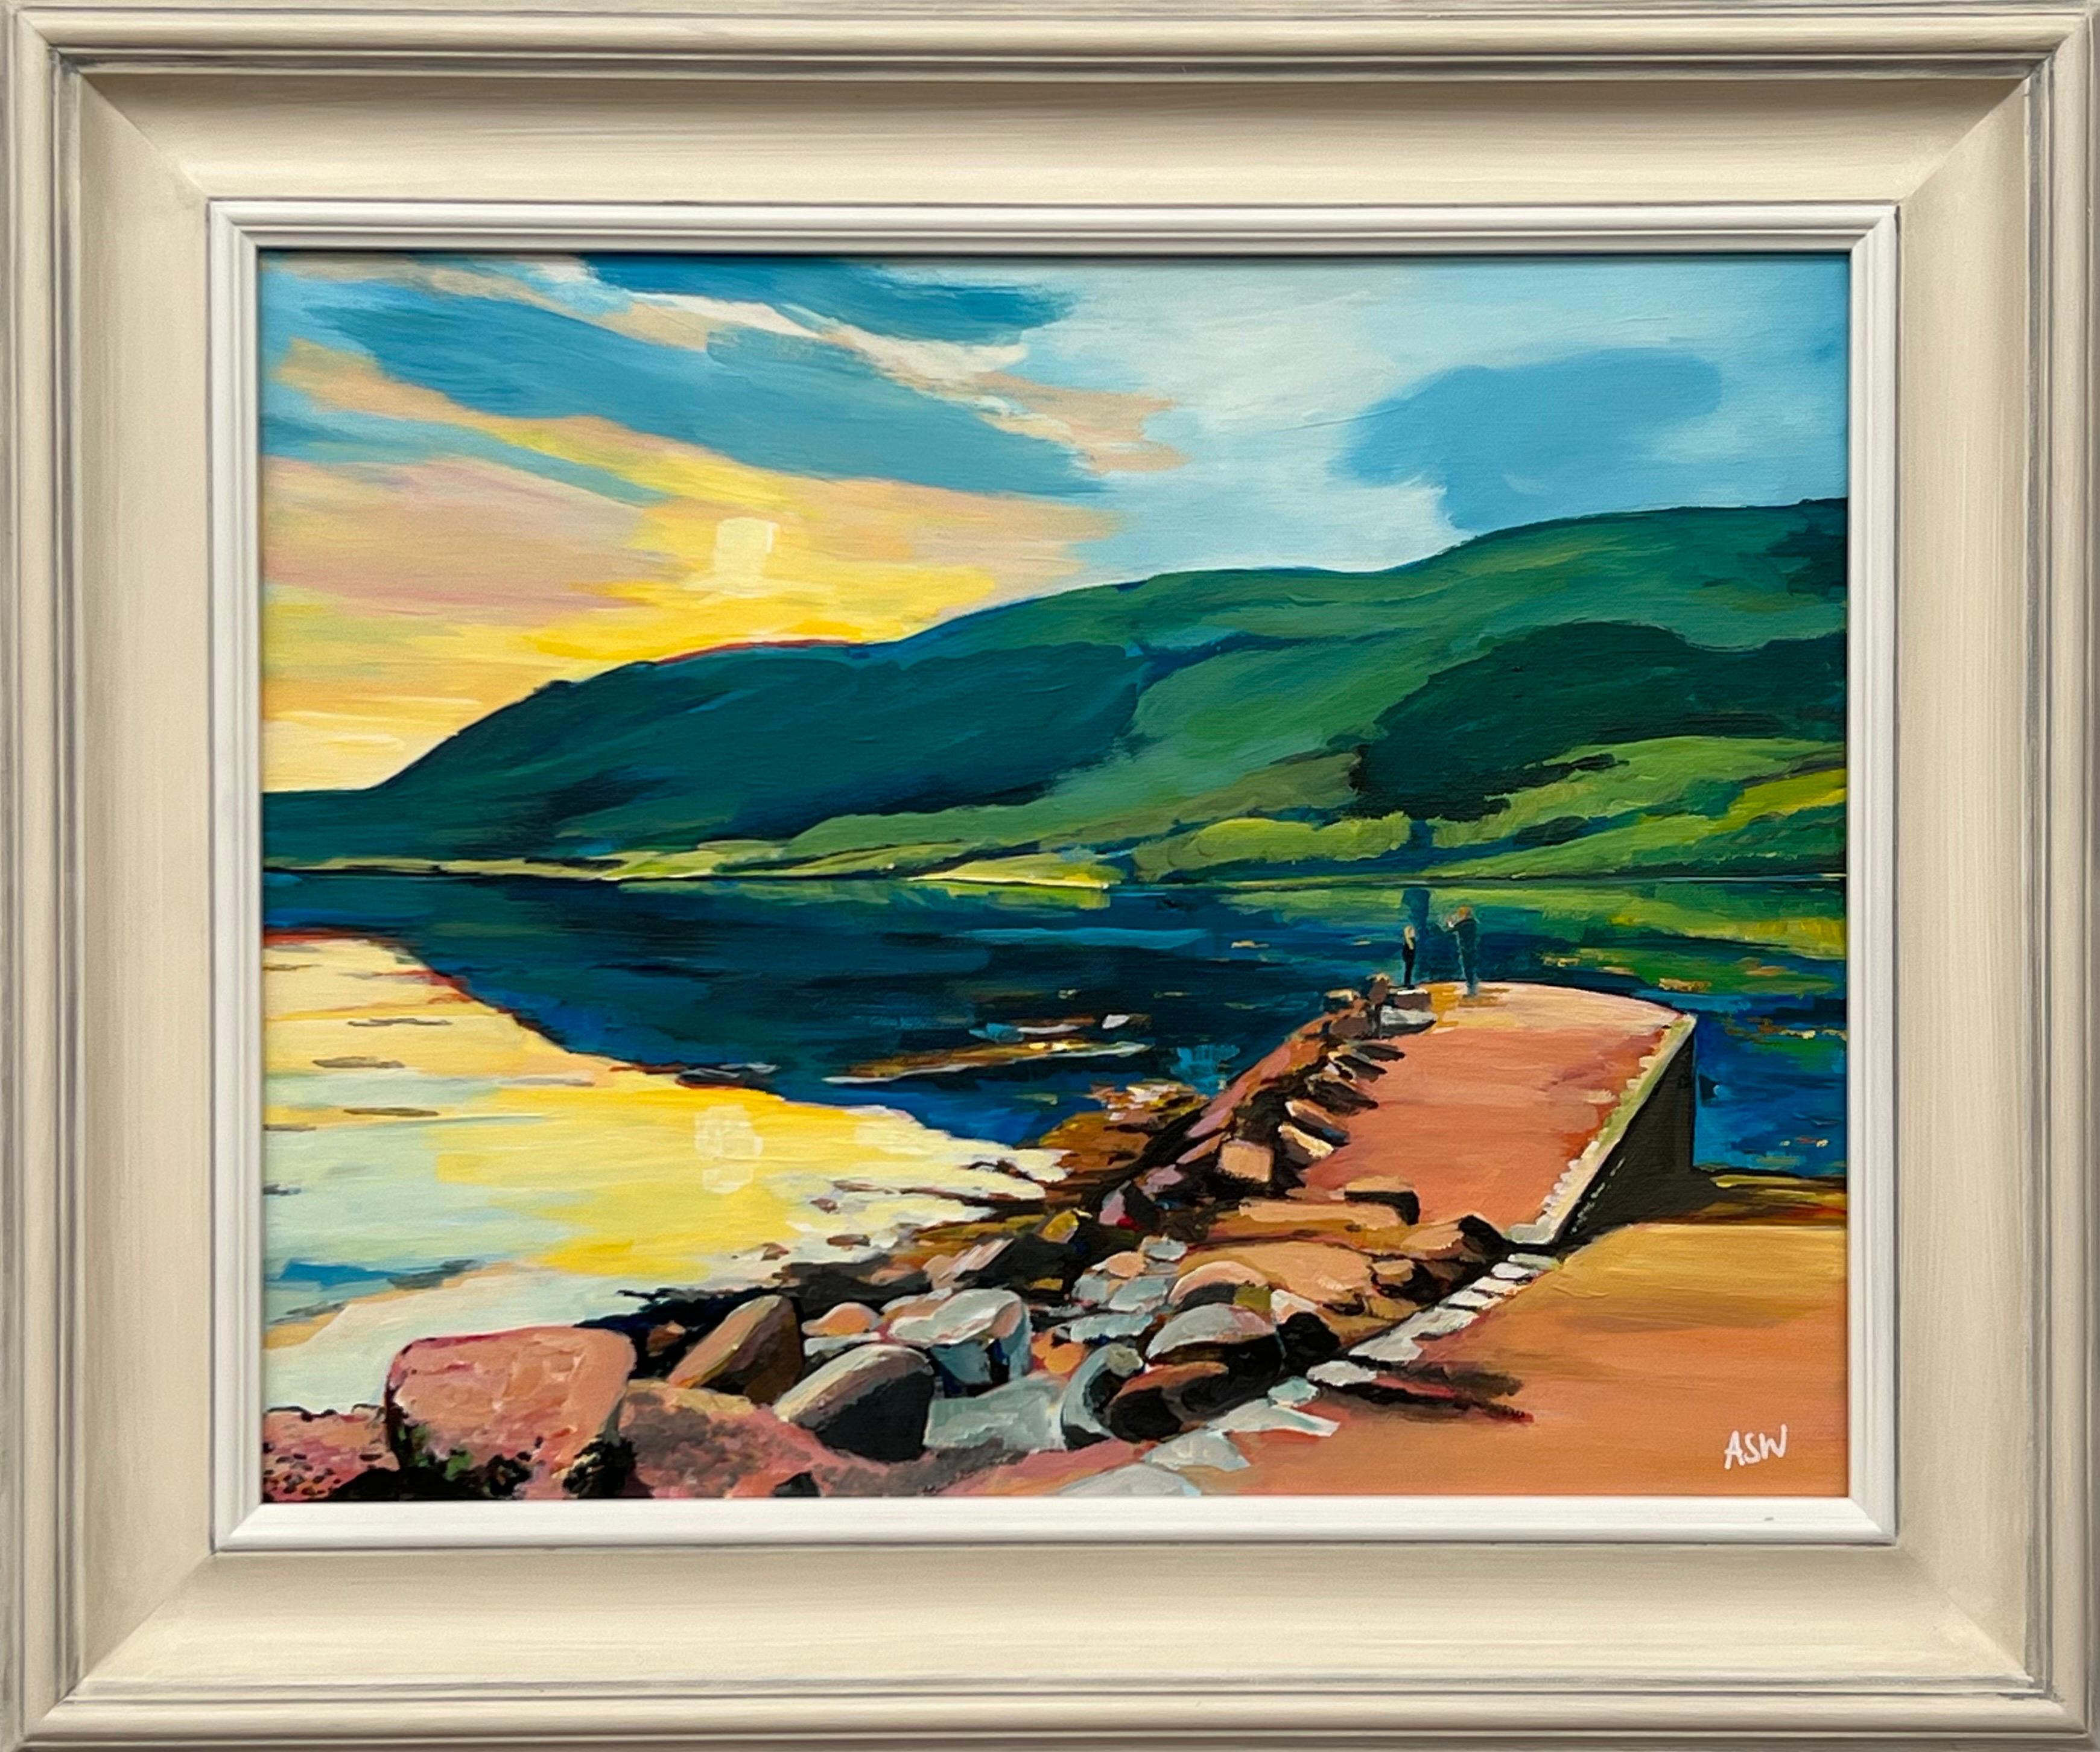 Angela Wakefield Landscape Painting - Sunset at Loch in the Mountains of the Scottish Highlands by Contemporary Artist